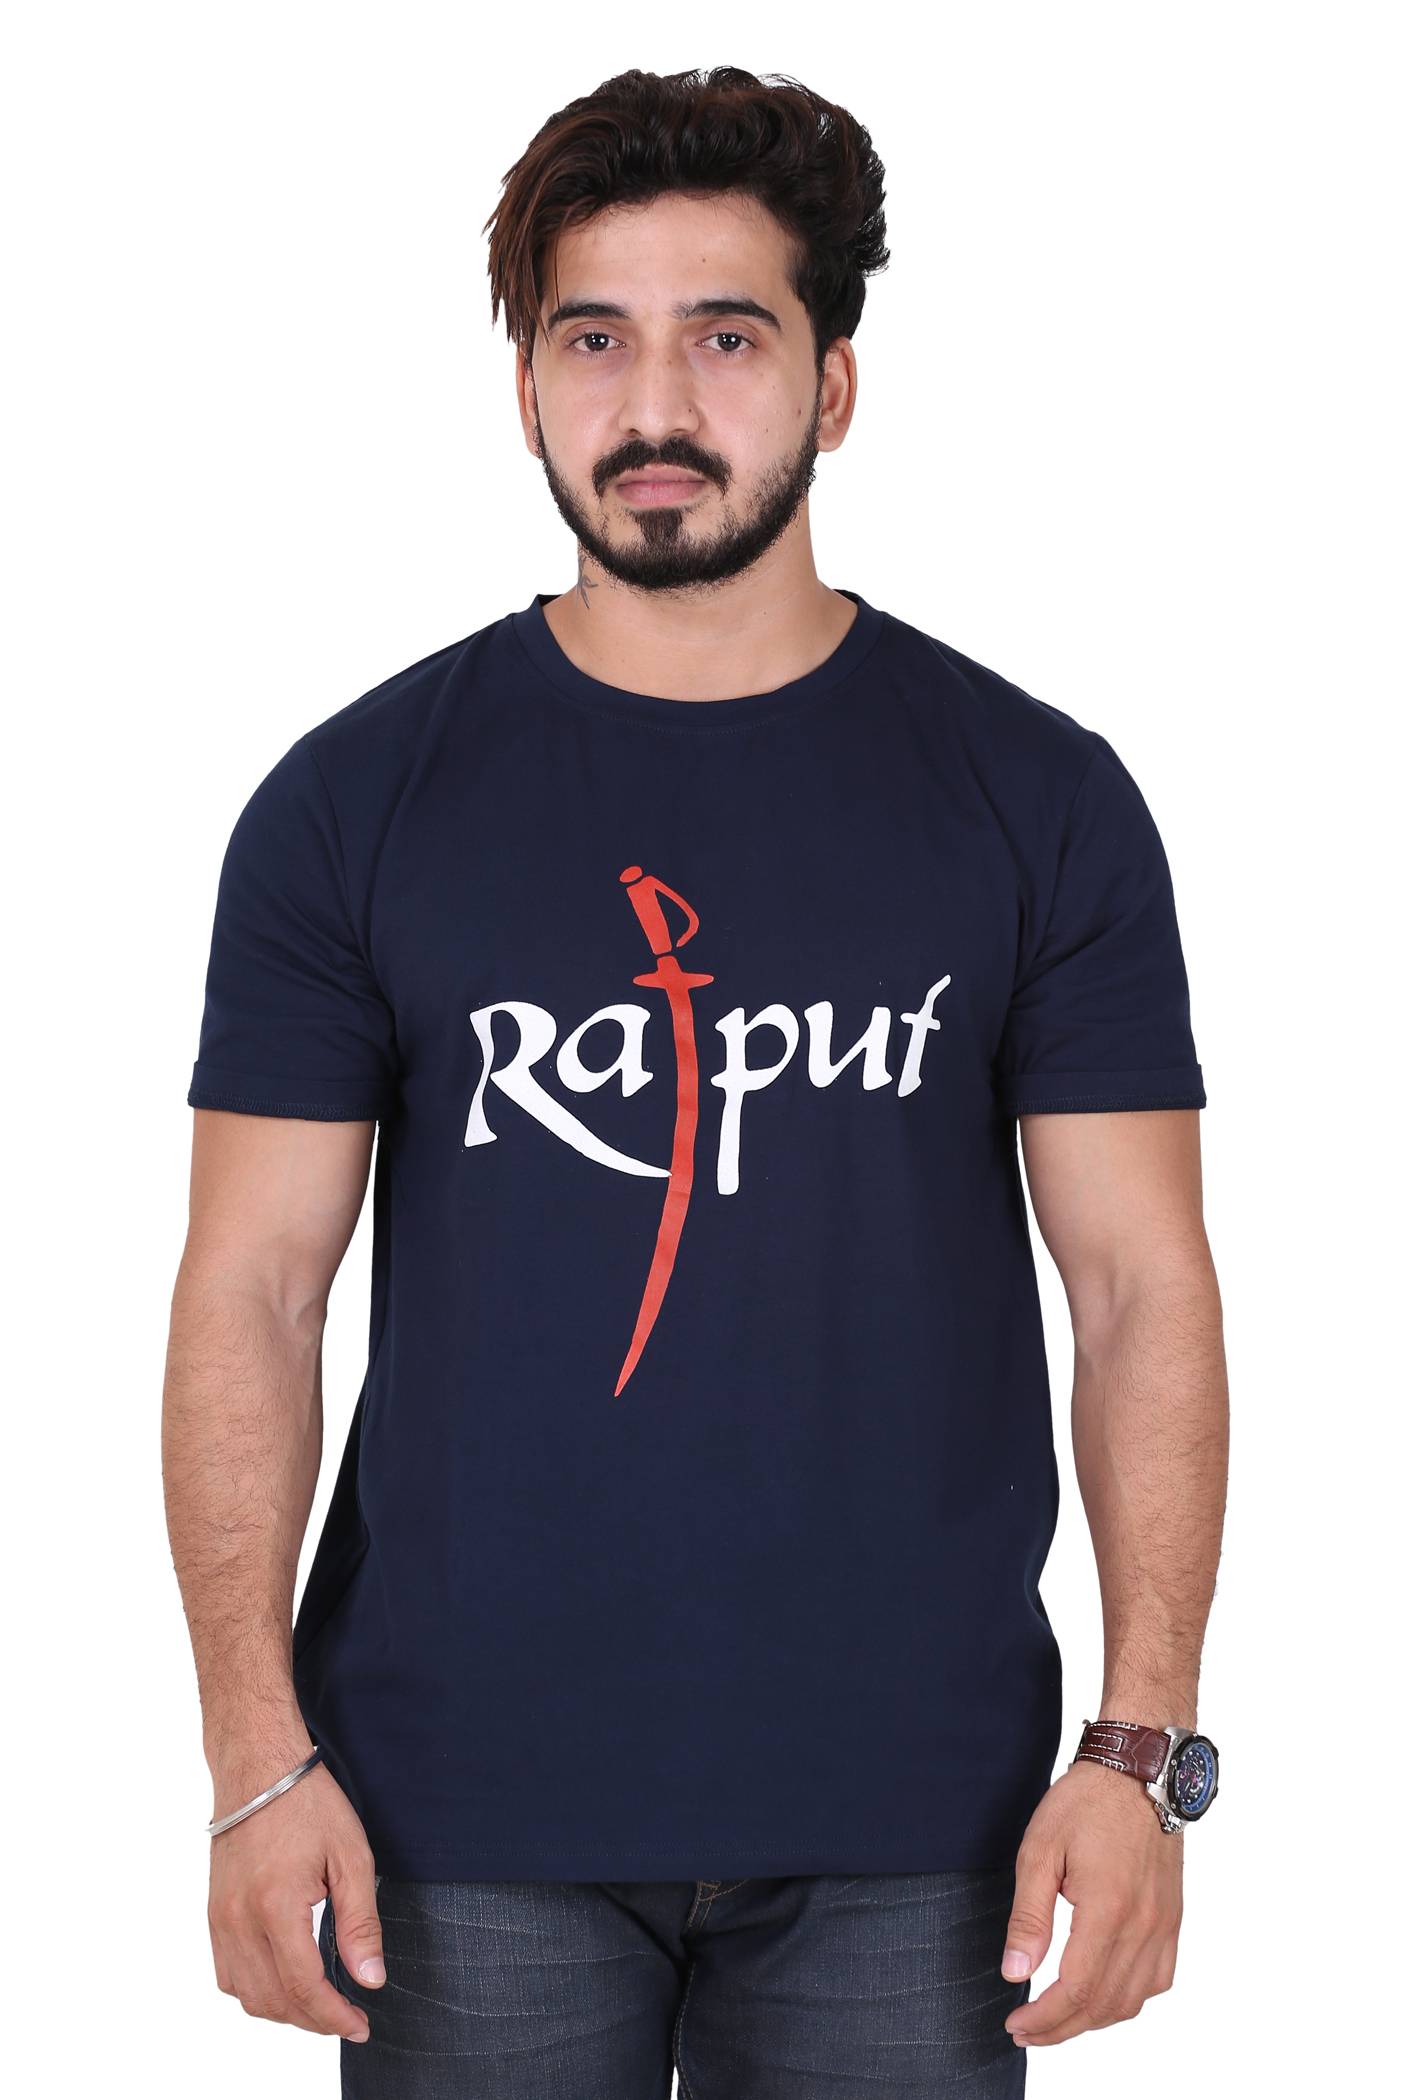 Buy Rajput Tshirt Navy Blue By Attitude Jeans Online @ ₹299 from ShopClues